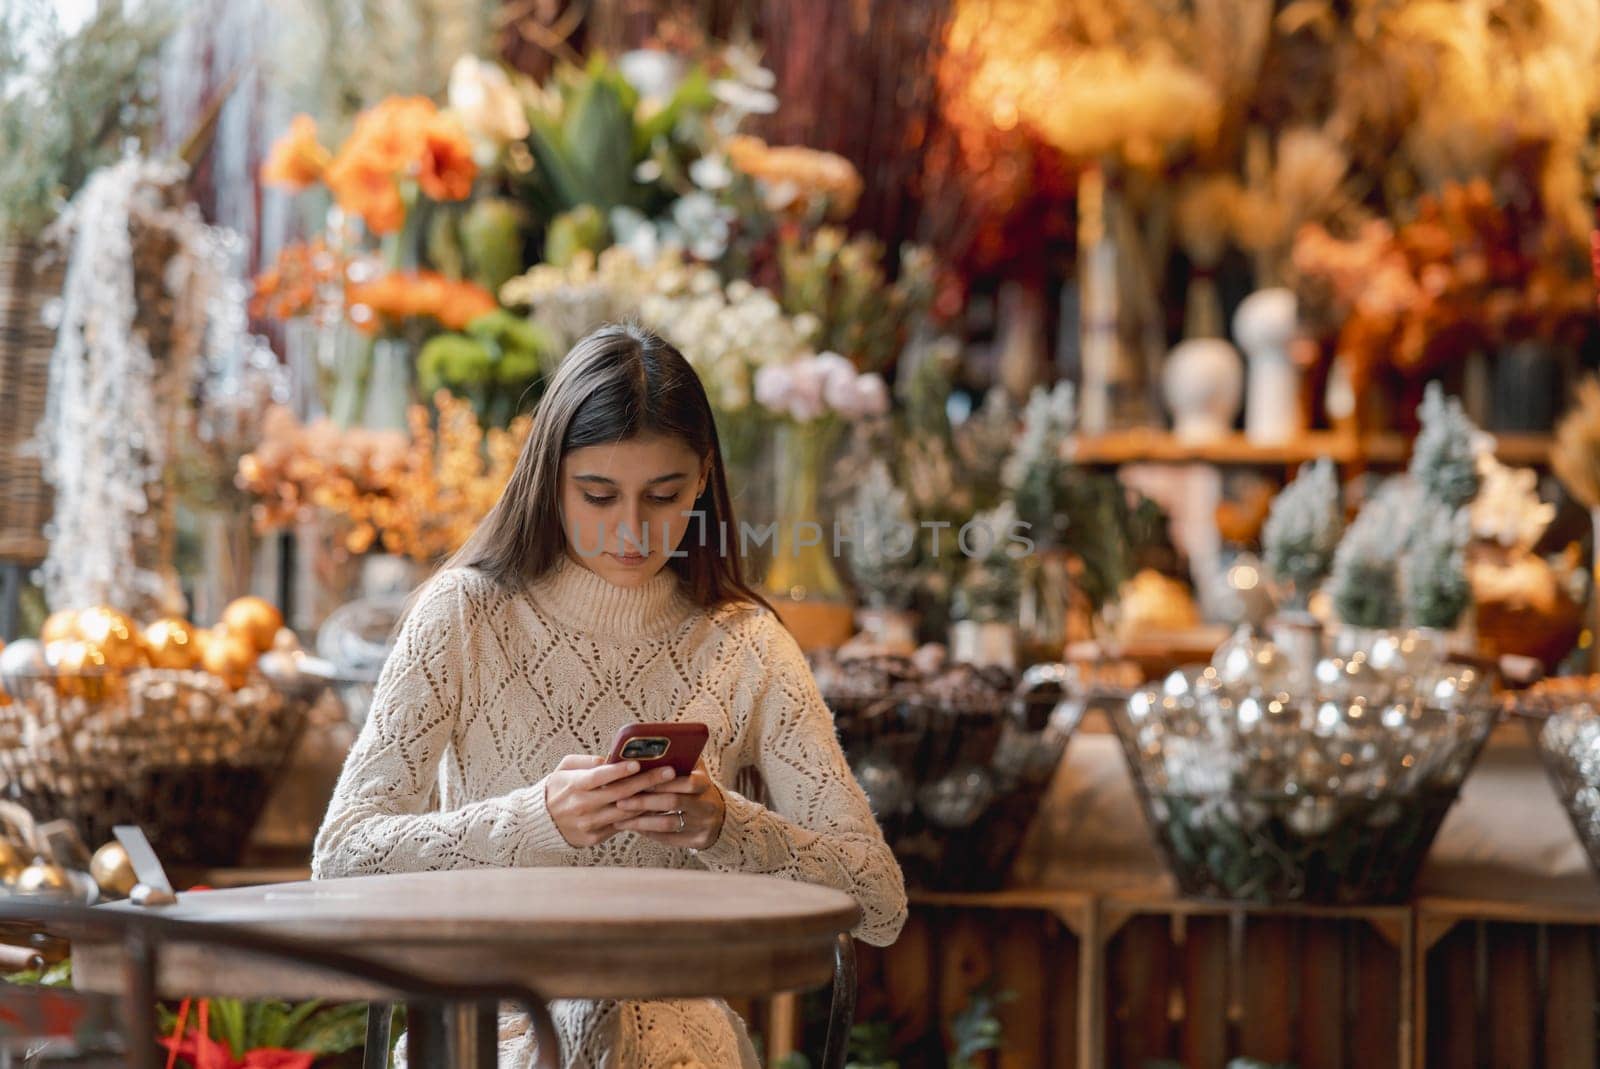 A beautiful woman explores the decor store with her phone in hand. by teksomolika